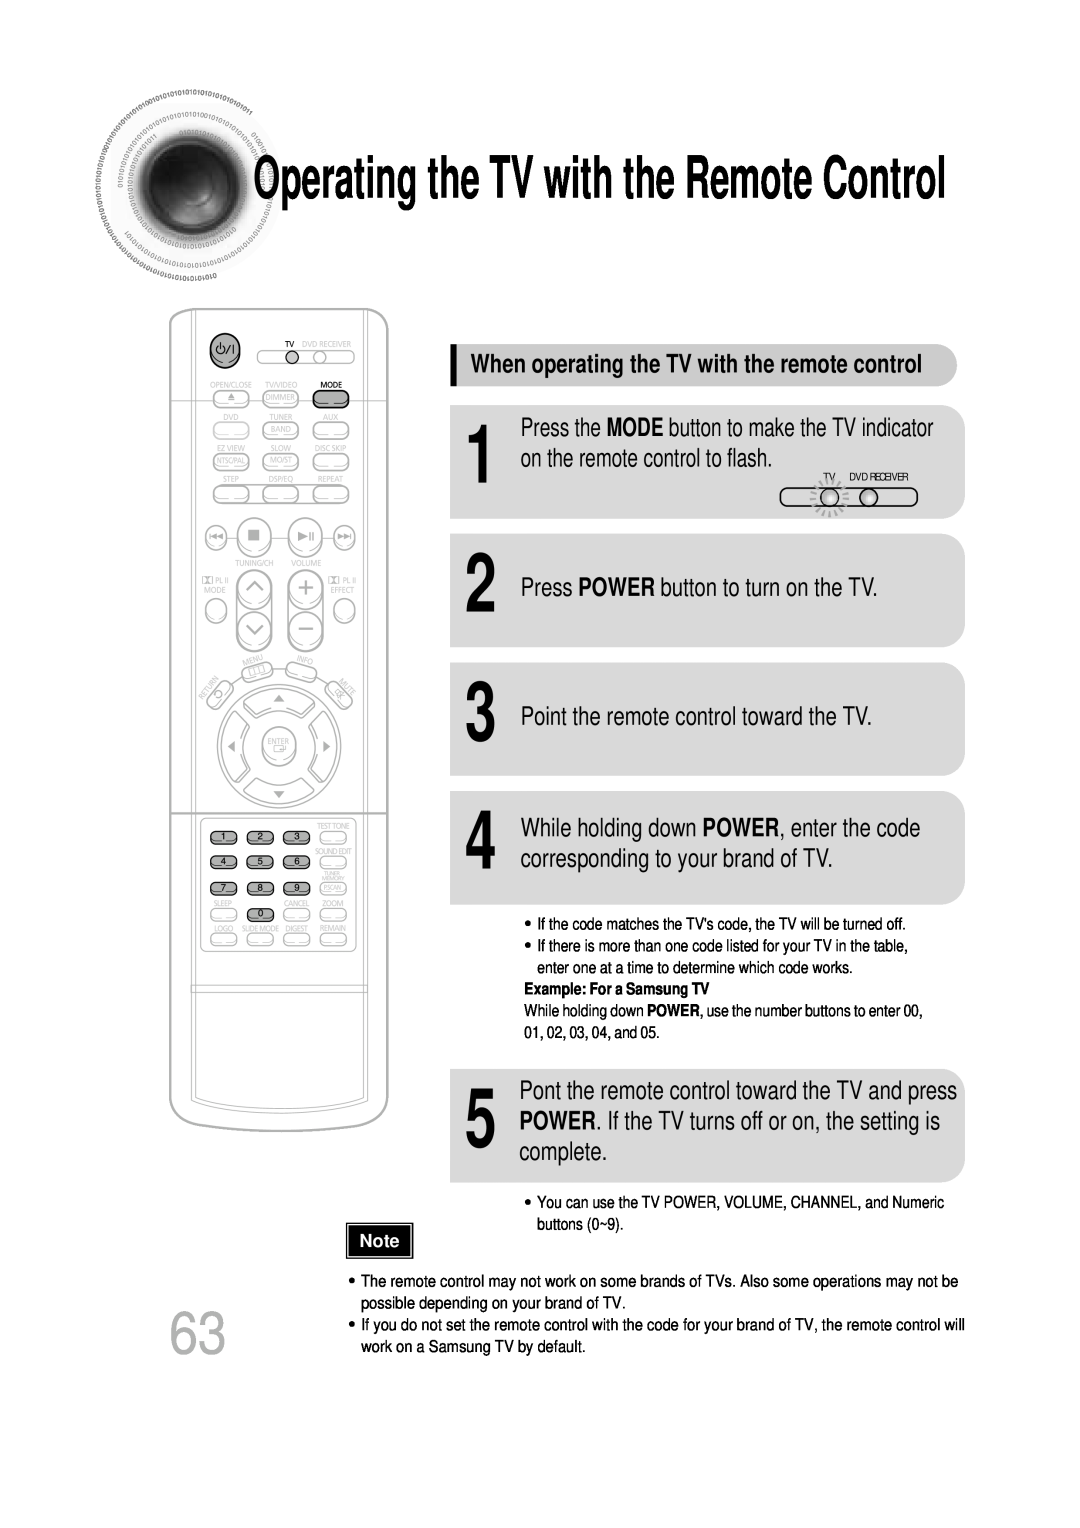 Samsung HT-DB600 When operating the TV with the remote control, on the remote control to flash, Example For a Samsung TV 